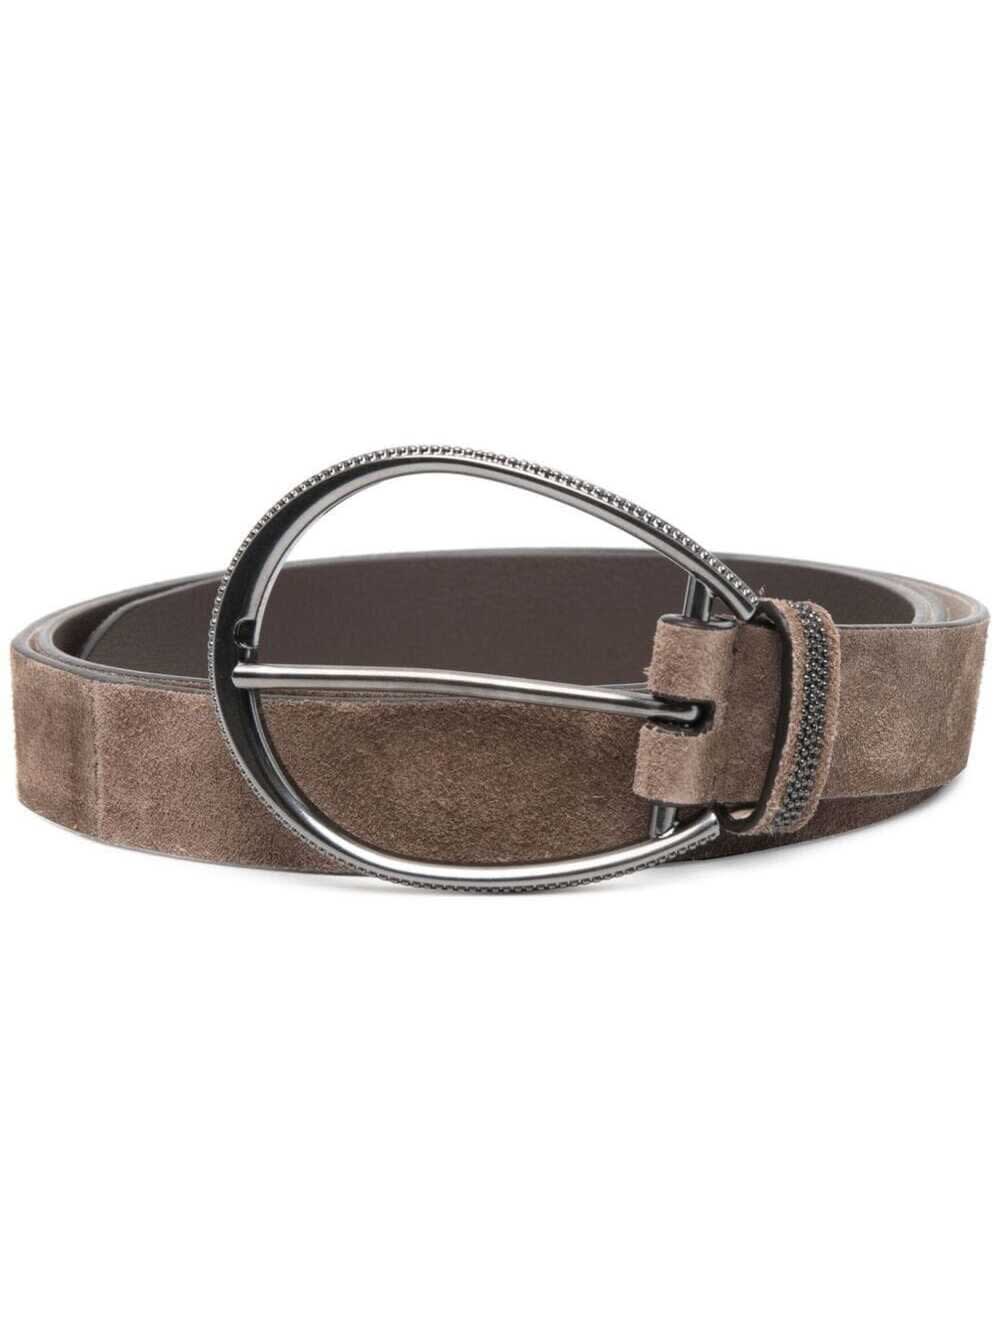 Brunello Cucinelli Suede Leather Belt With Monile Detail